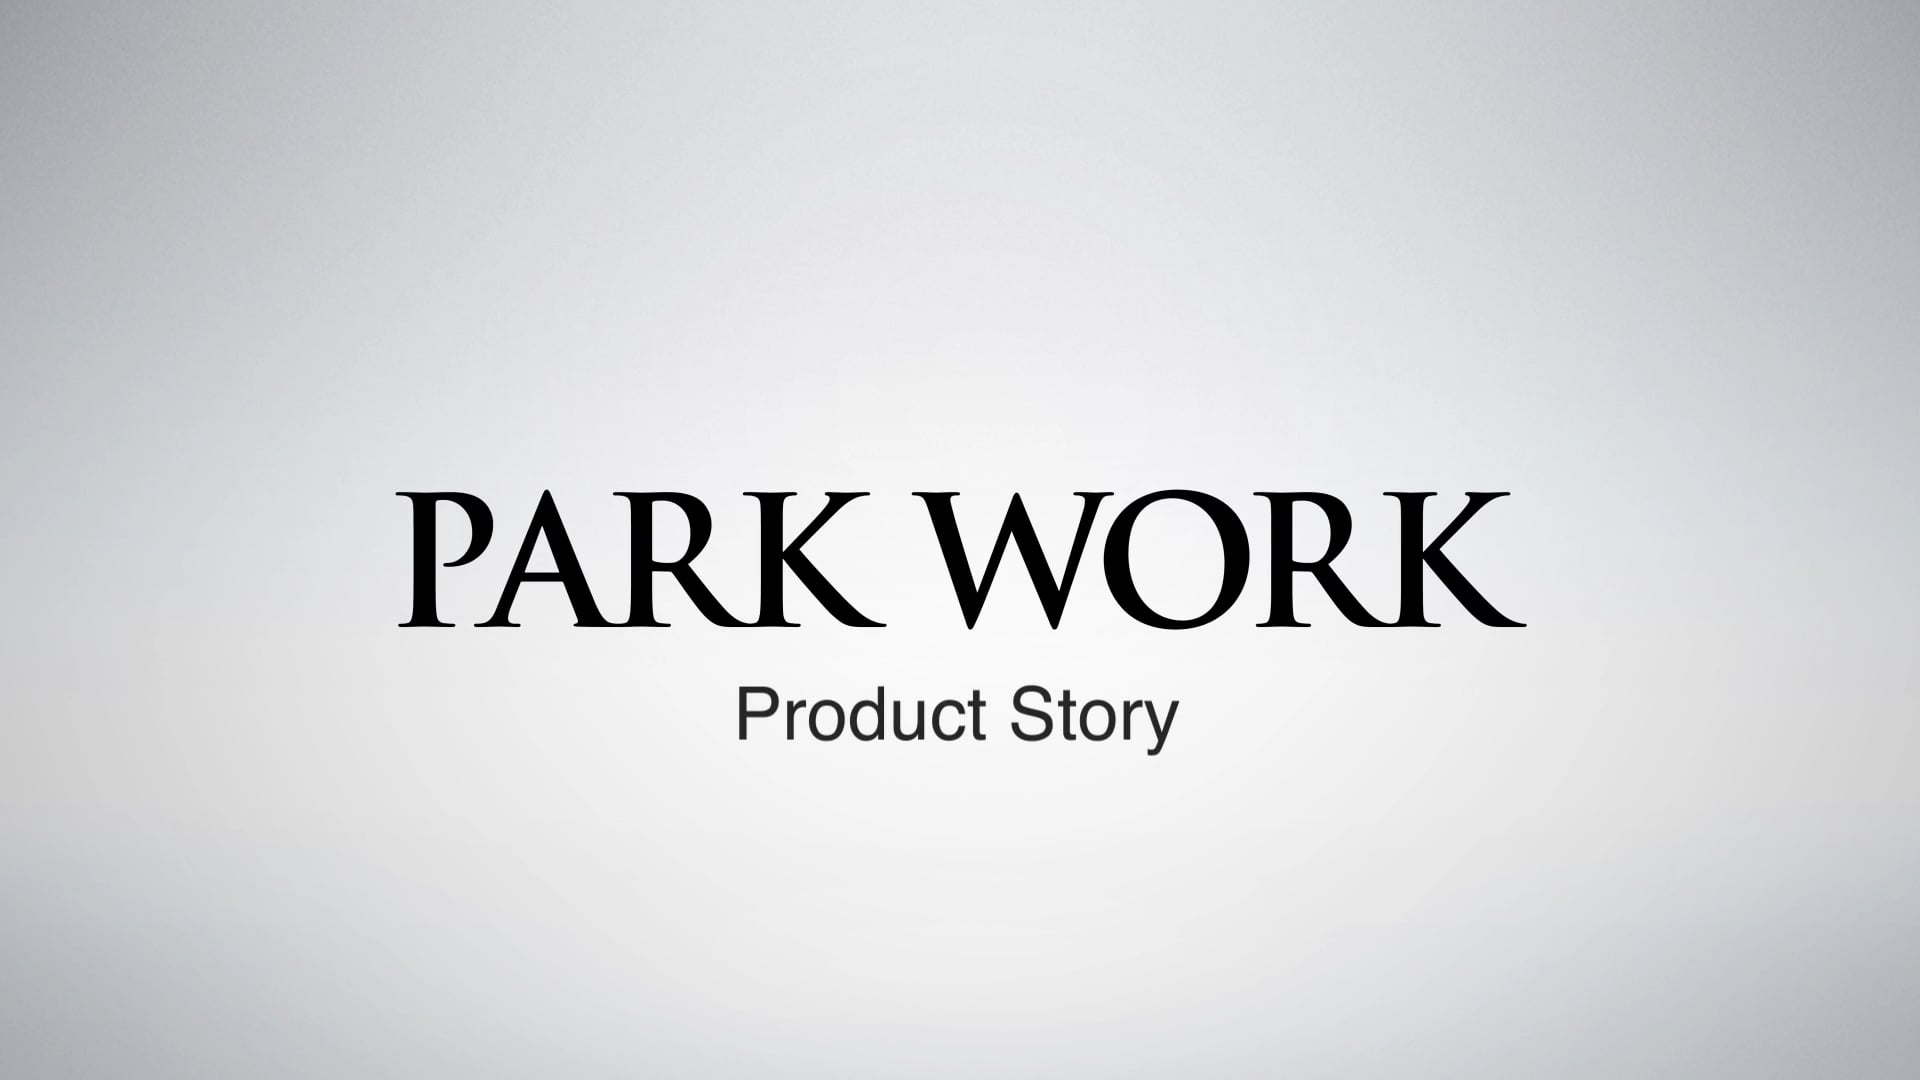 PARK WORK Product Story